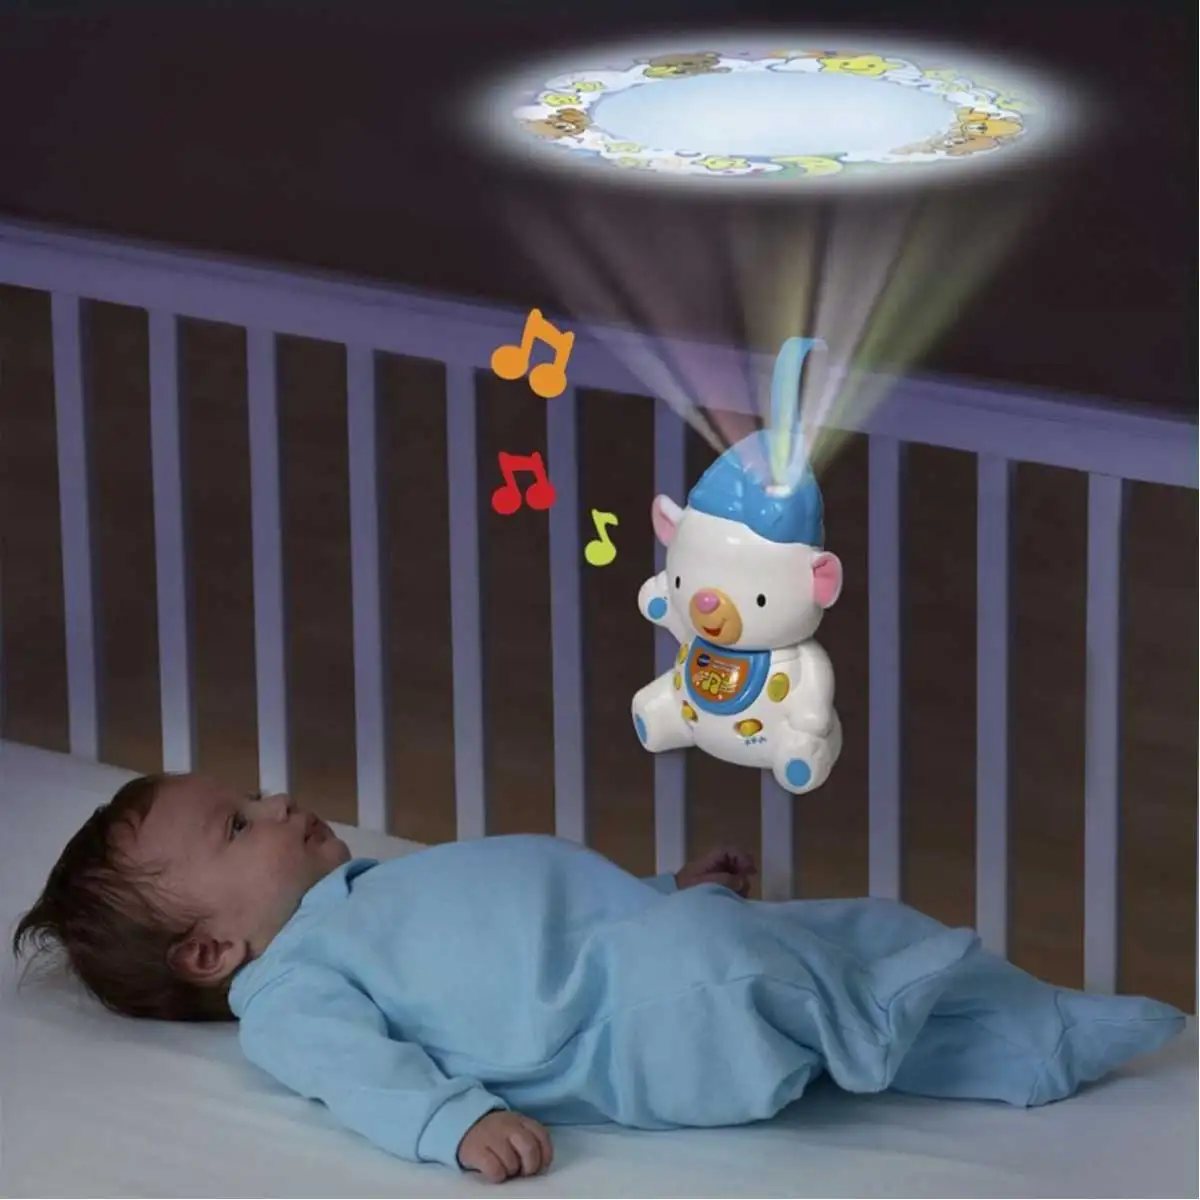 

More than 40 Turkish songs, melodies and Colorful lights, shapes are reflected on the ceiling with the Blue Teddy Bear.